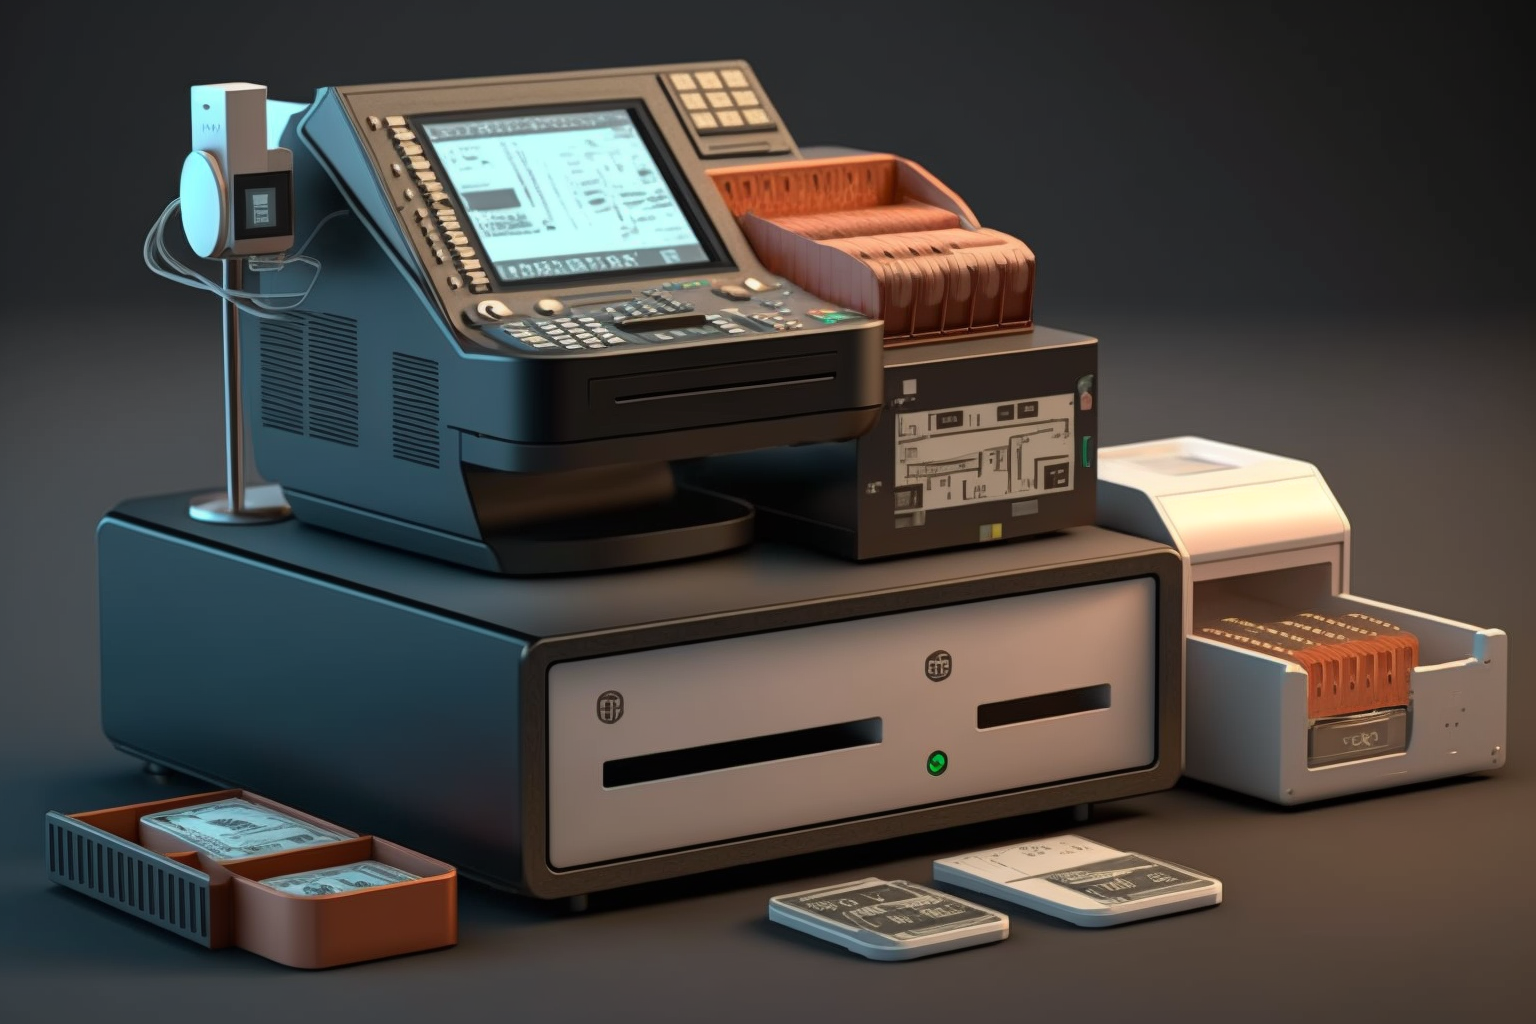 From Cash Registers to Mobile Payment Systems: Tracing the Evolution of POS Technology and What the Future Holds